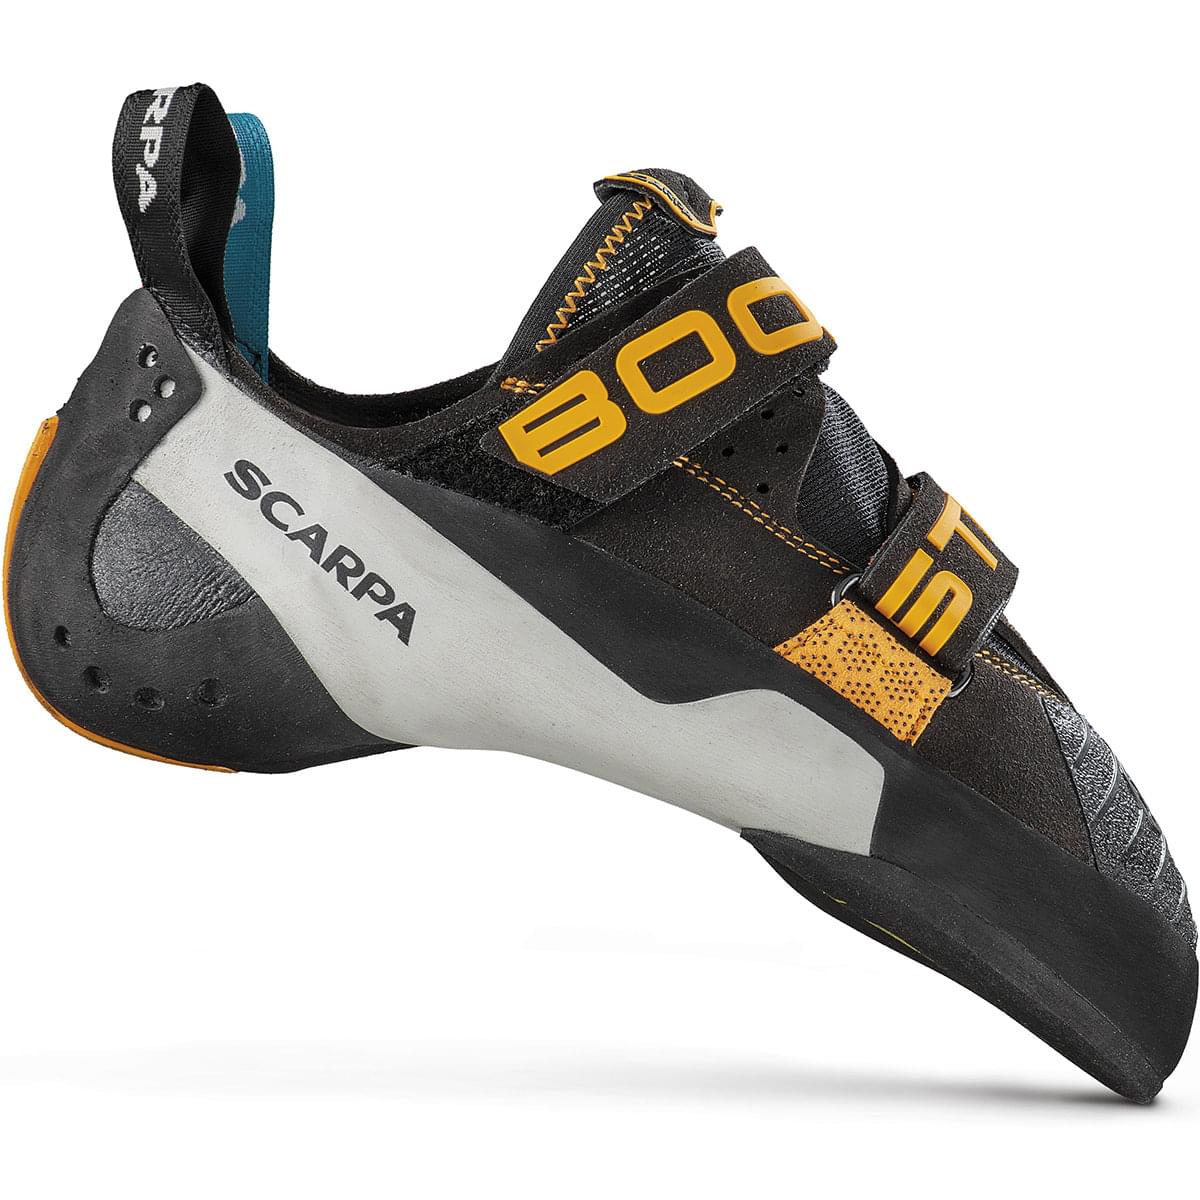 Scarpa Booster - Climbing shoes